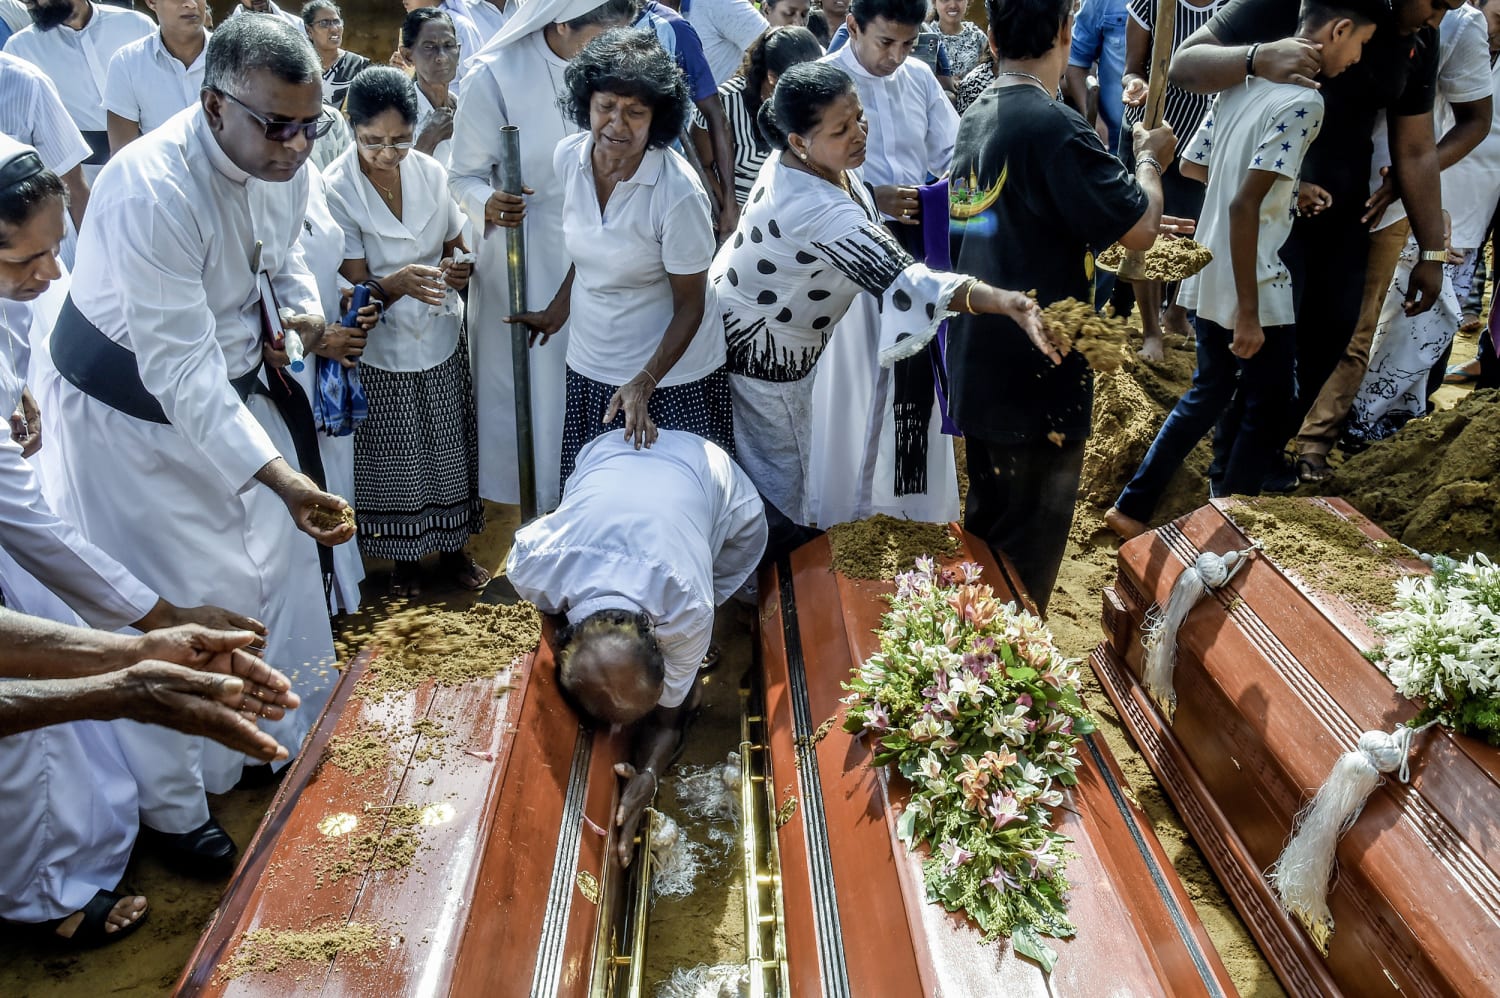 Sri Lankans mourn bombing victims during funerals